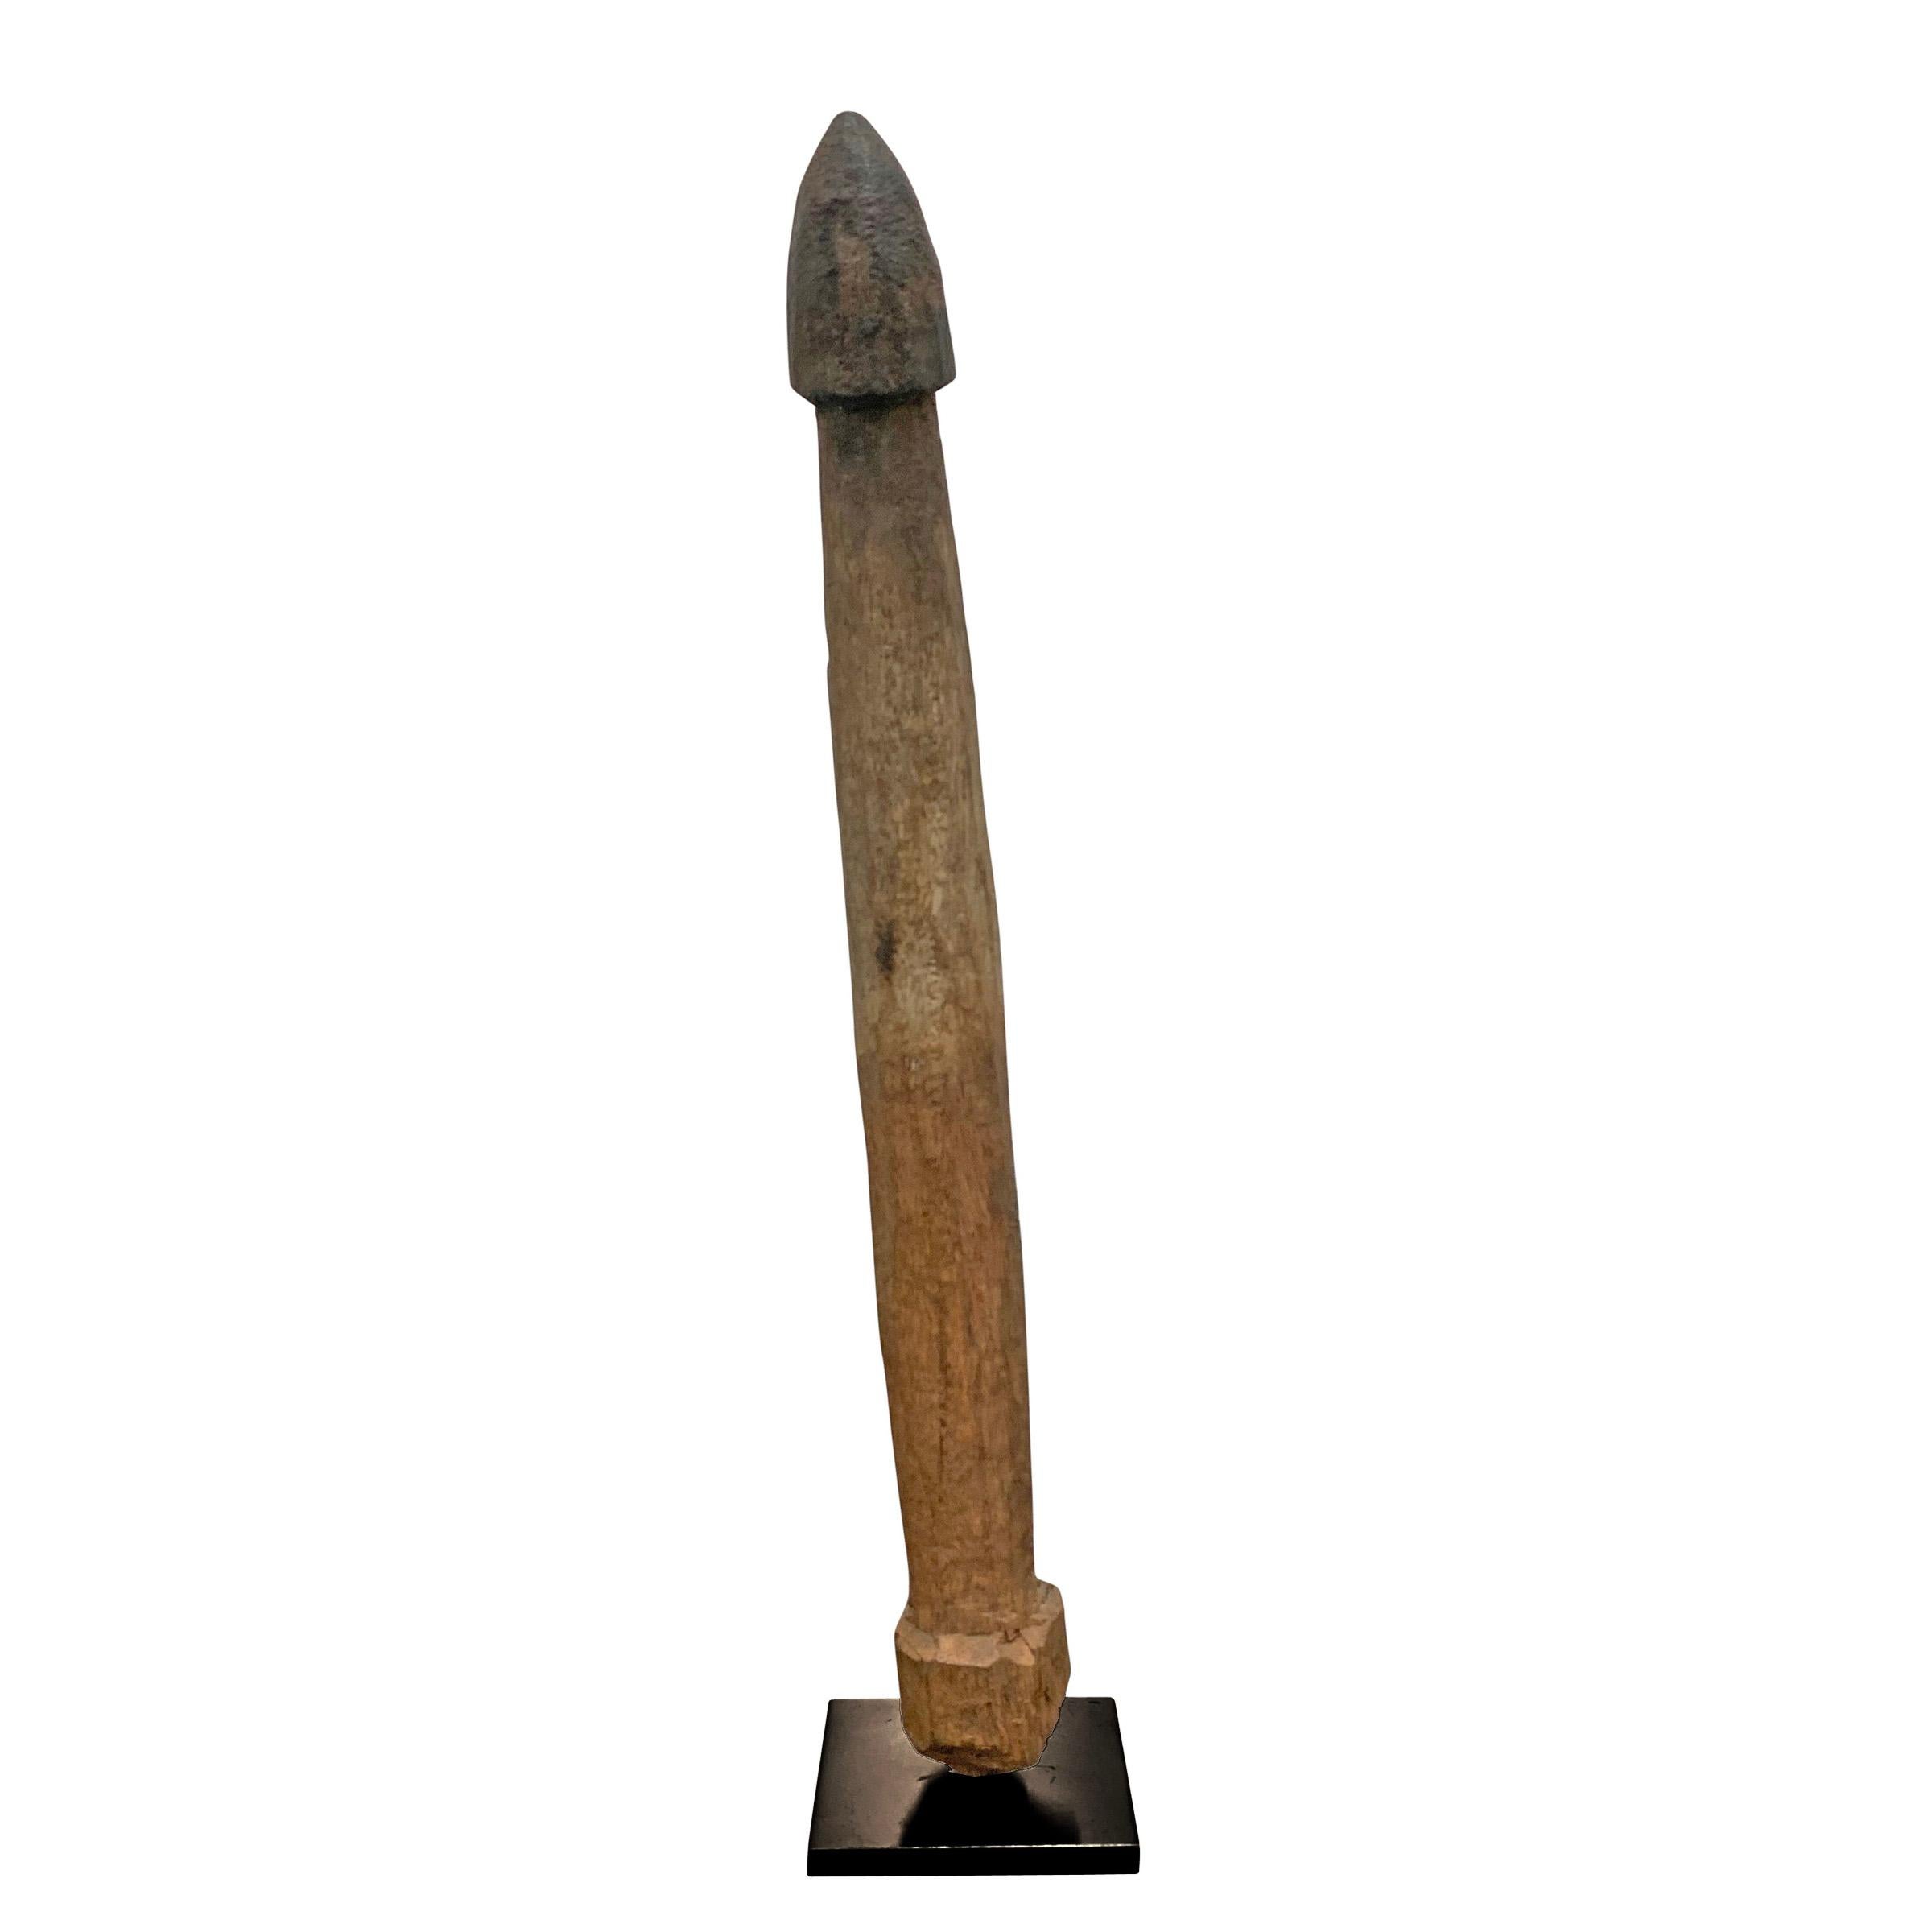 A wonderful early 20th century Fon wooden phallus fertility figure mounted on custom steel stand. Phallus figures like these were placed into the dirt of a farmer's field as an offering for a fertile and abundant crop. This piece shows lots of wear